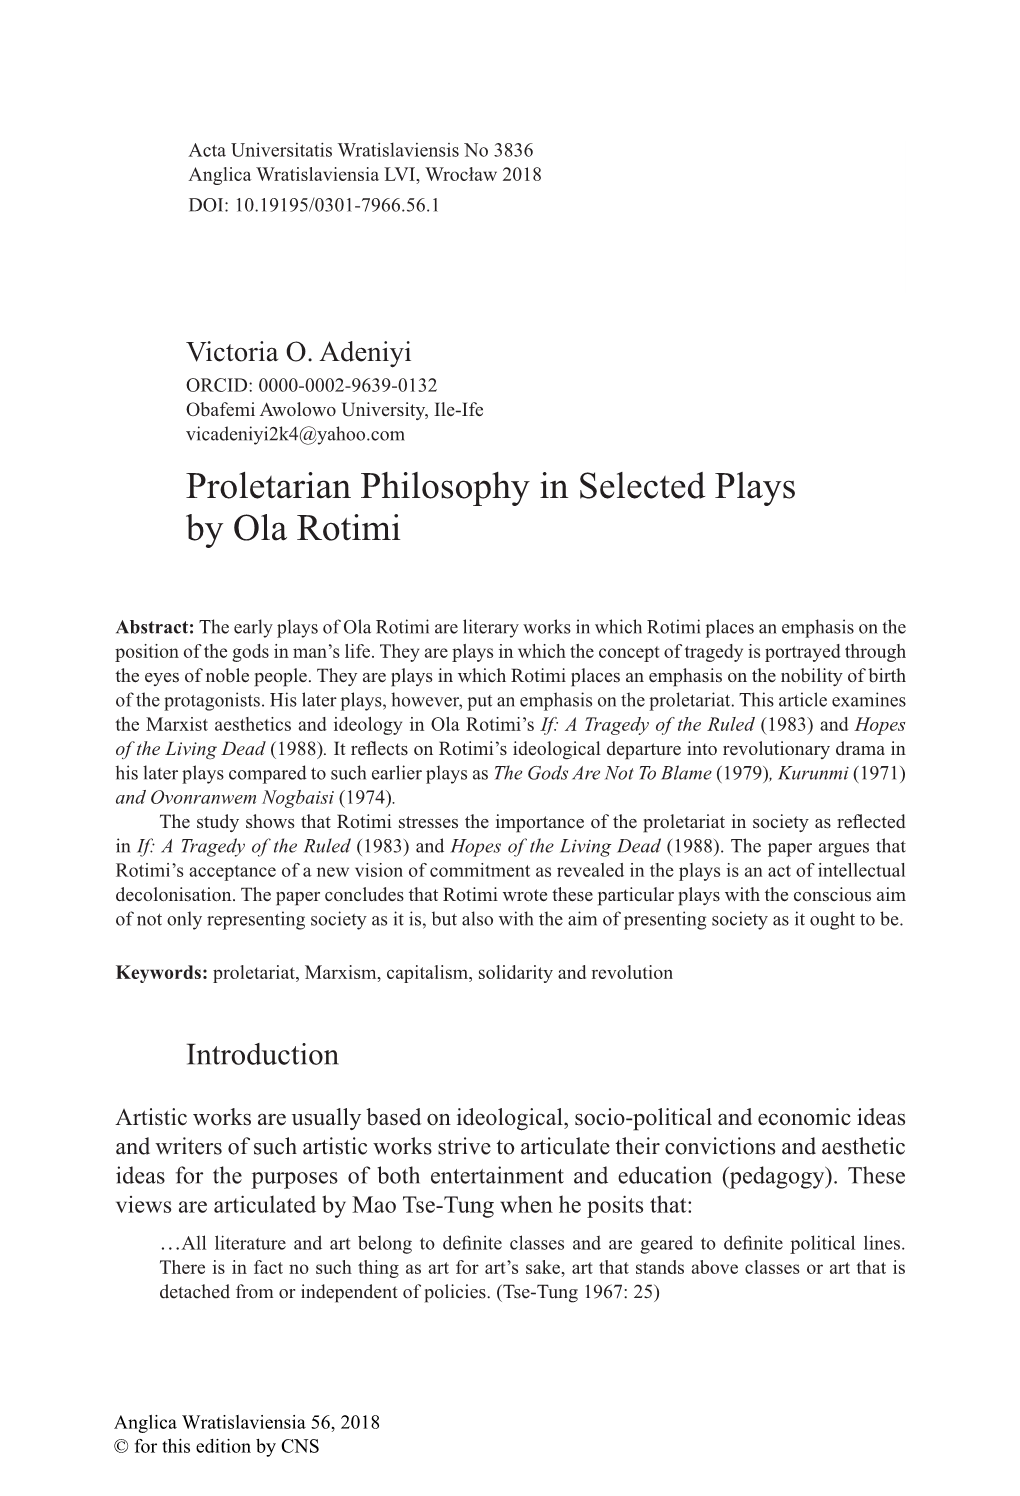 Proletarian Philosophy in Selected Plays by Ola Rotimi